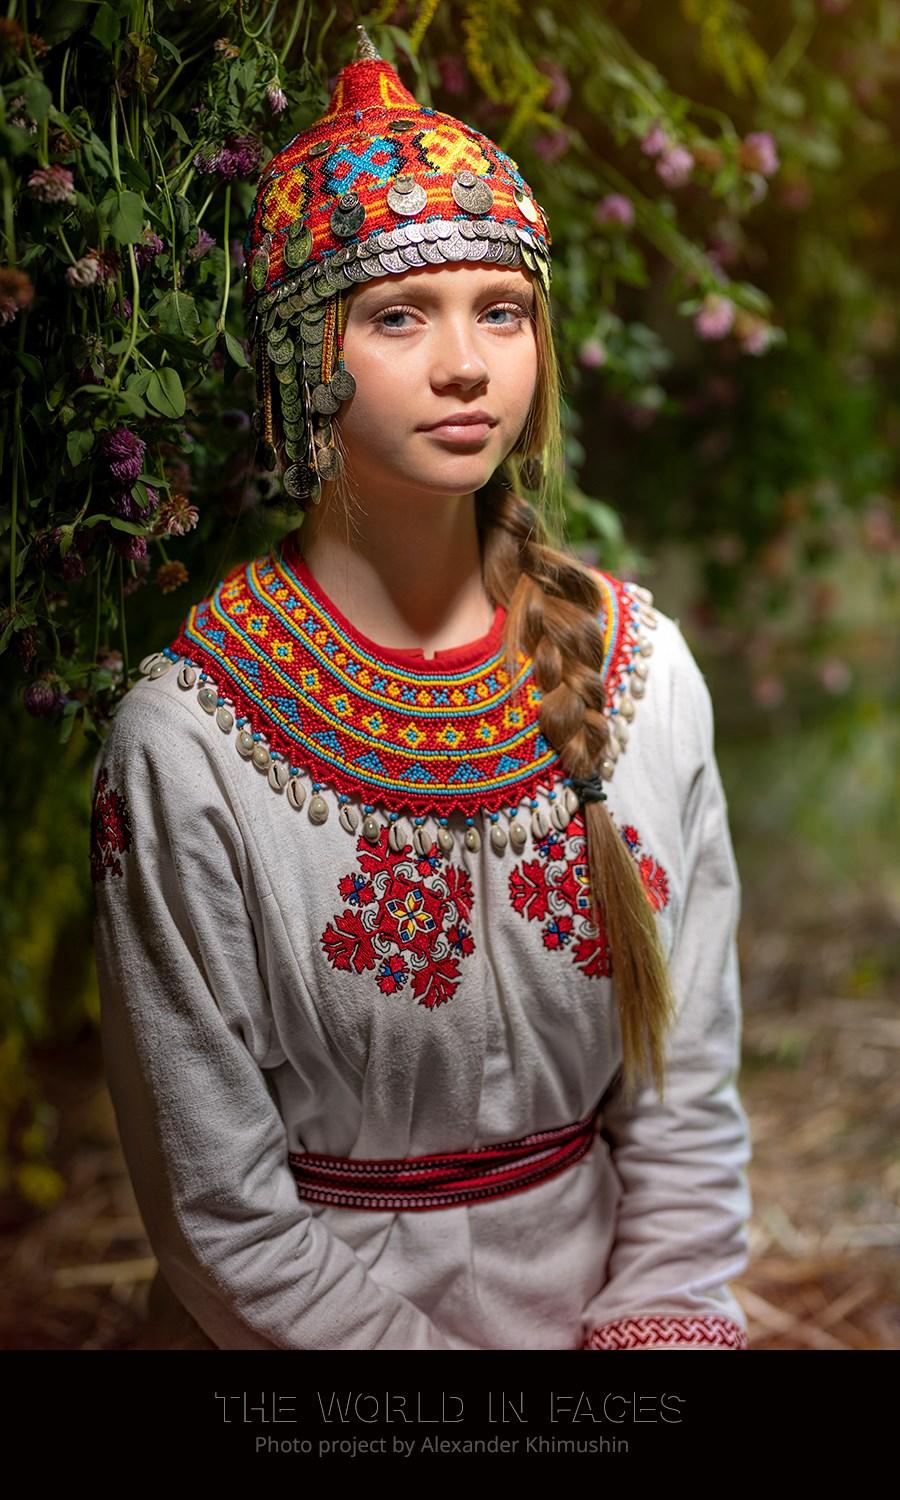 A Chuvash indigenous girl in traditional clothing with an unmarried-woman hat (tukhya) (© <a href="https://www.facebook.com/xperimenter">Alexander Khimushin</a> / The World In Faces)